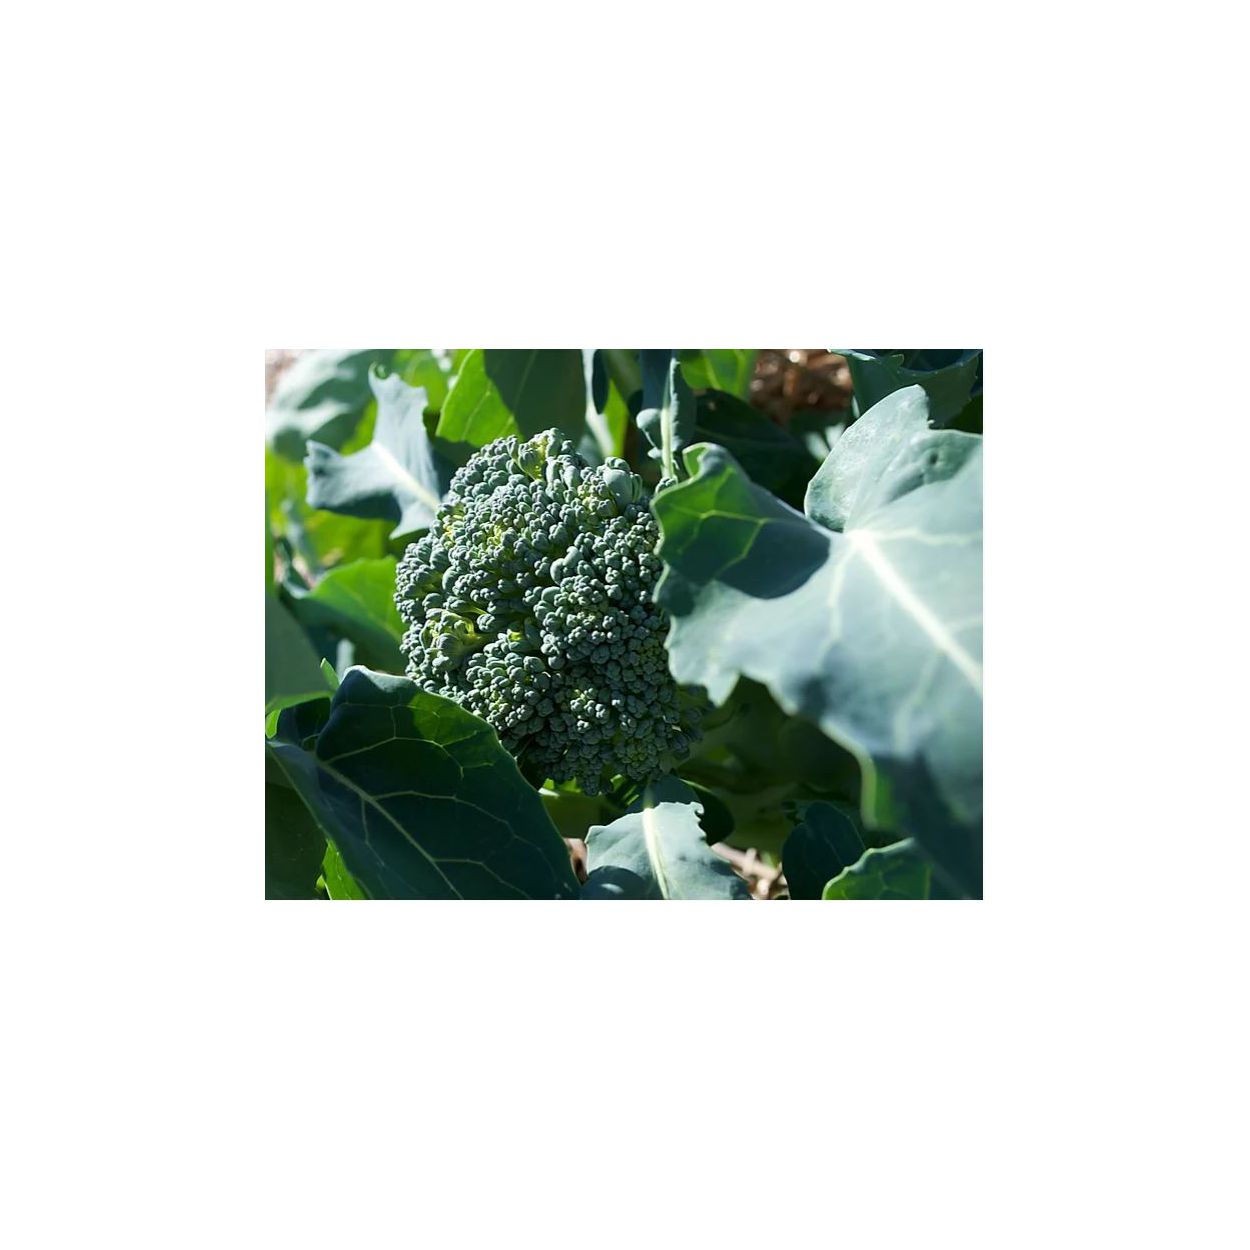 Brim Seed Co. - Green Sprouting Calabrese Broccoli Heirloom Seed